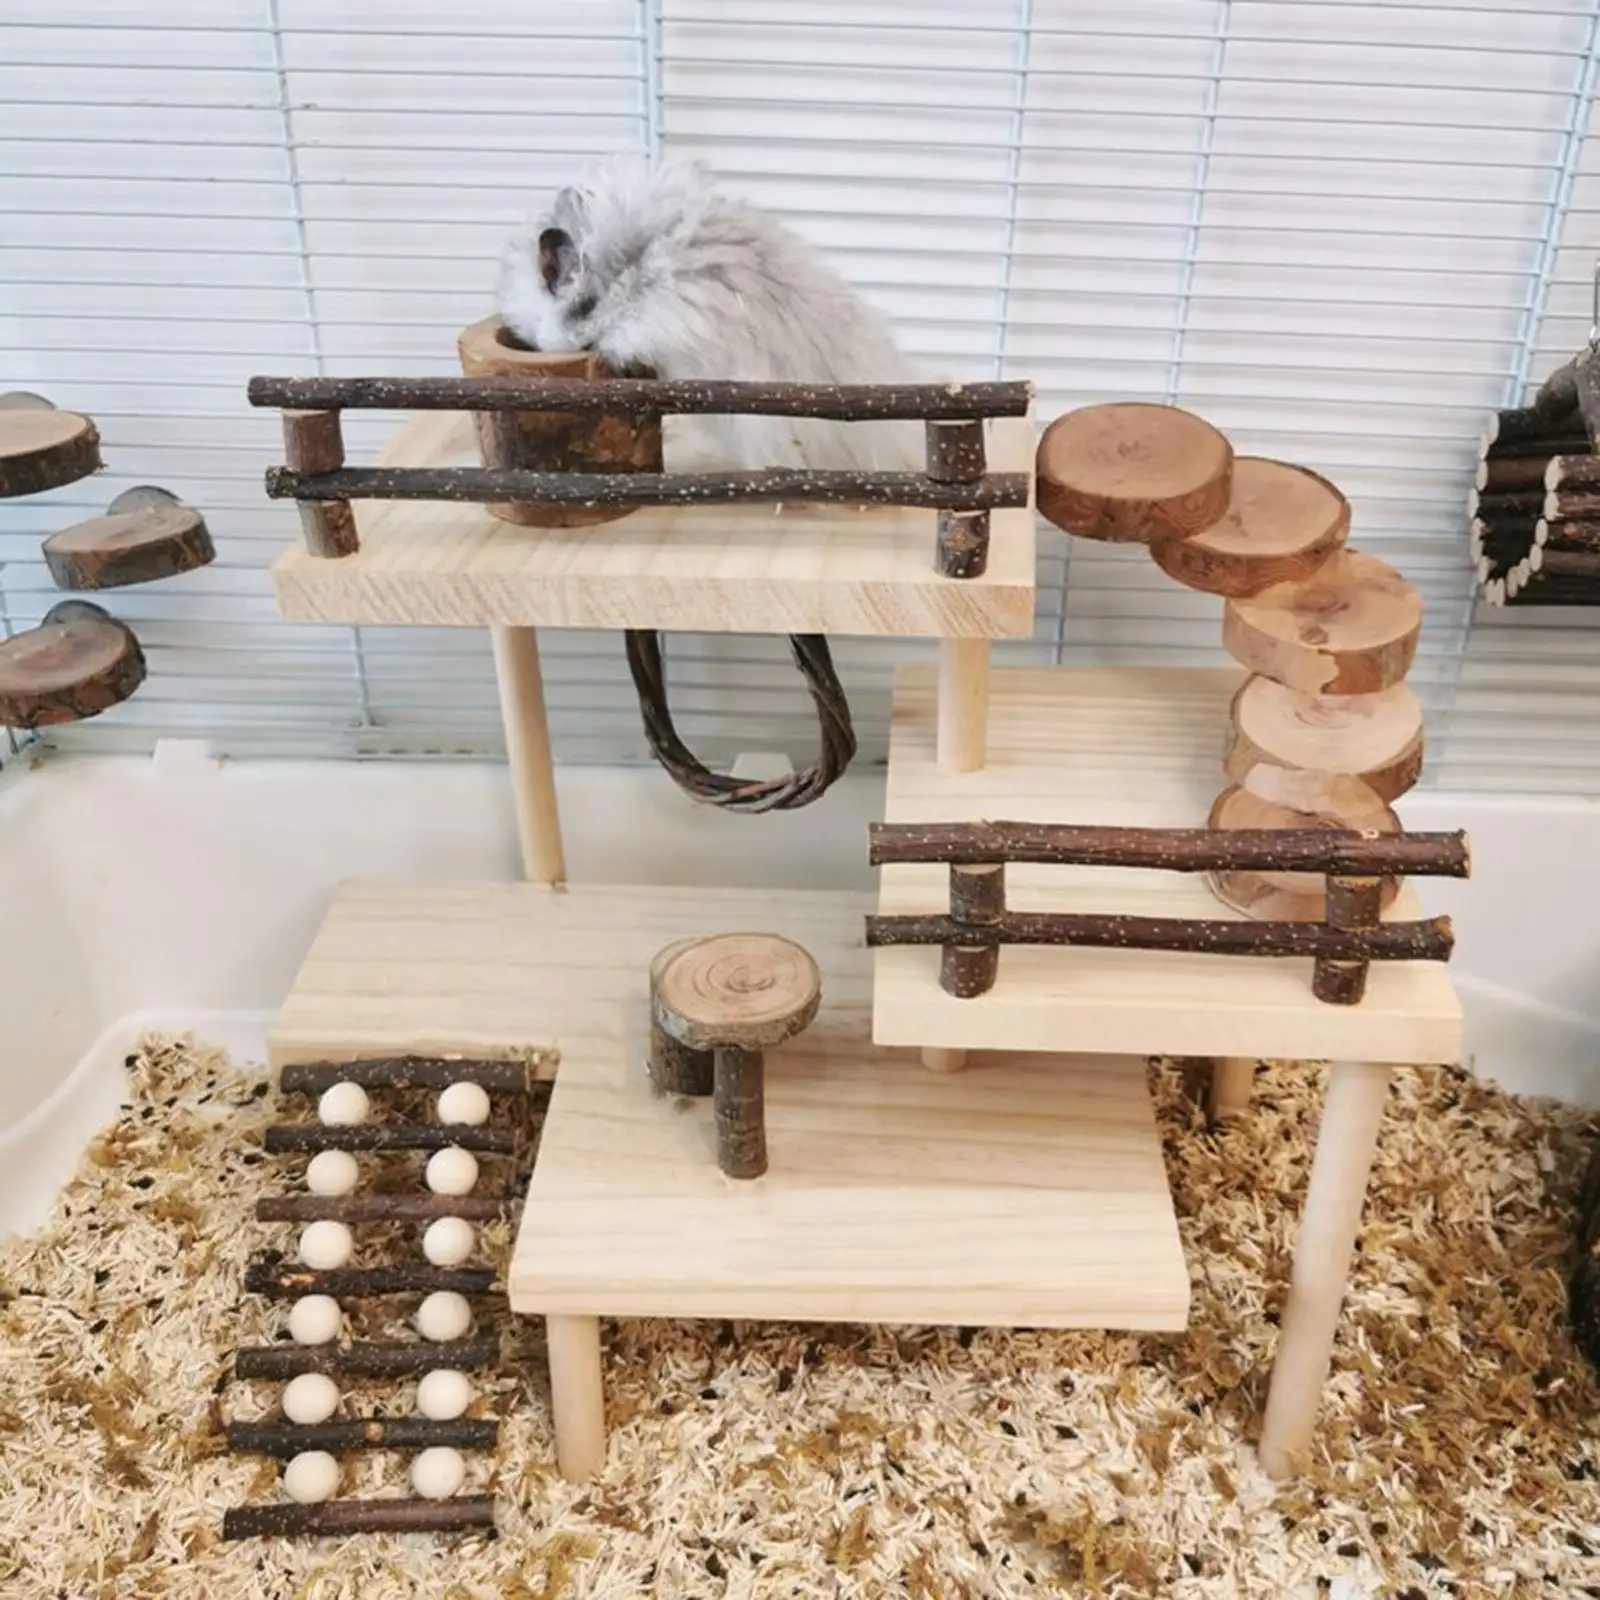 3 Layers Hamster Toy Climbing Ladder Playground Stairs Platform for Pet Supplies Exercise Hedgehog Cage Accessories Gerbil